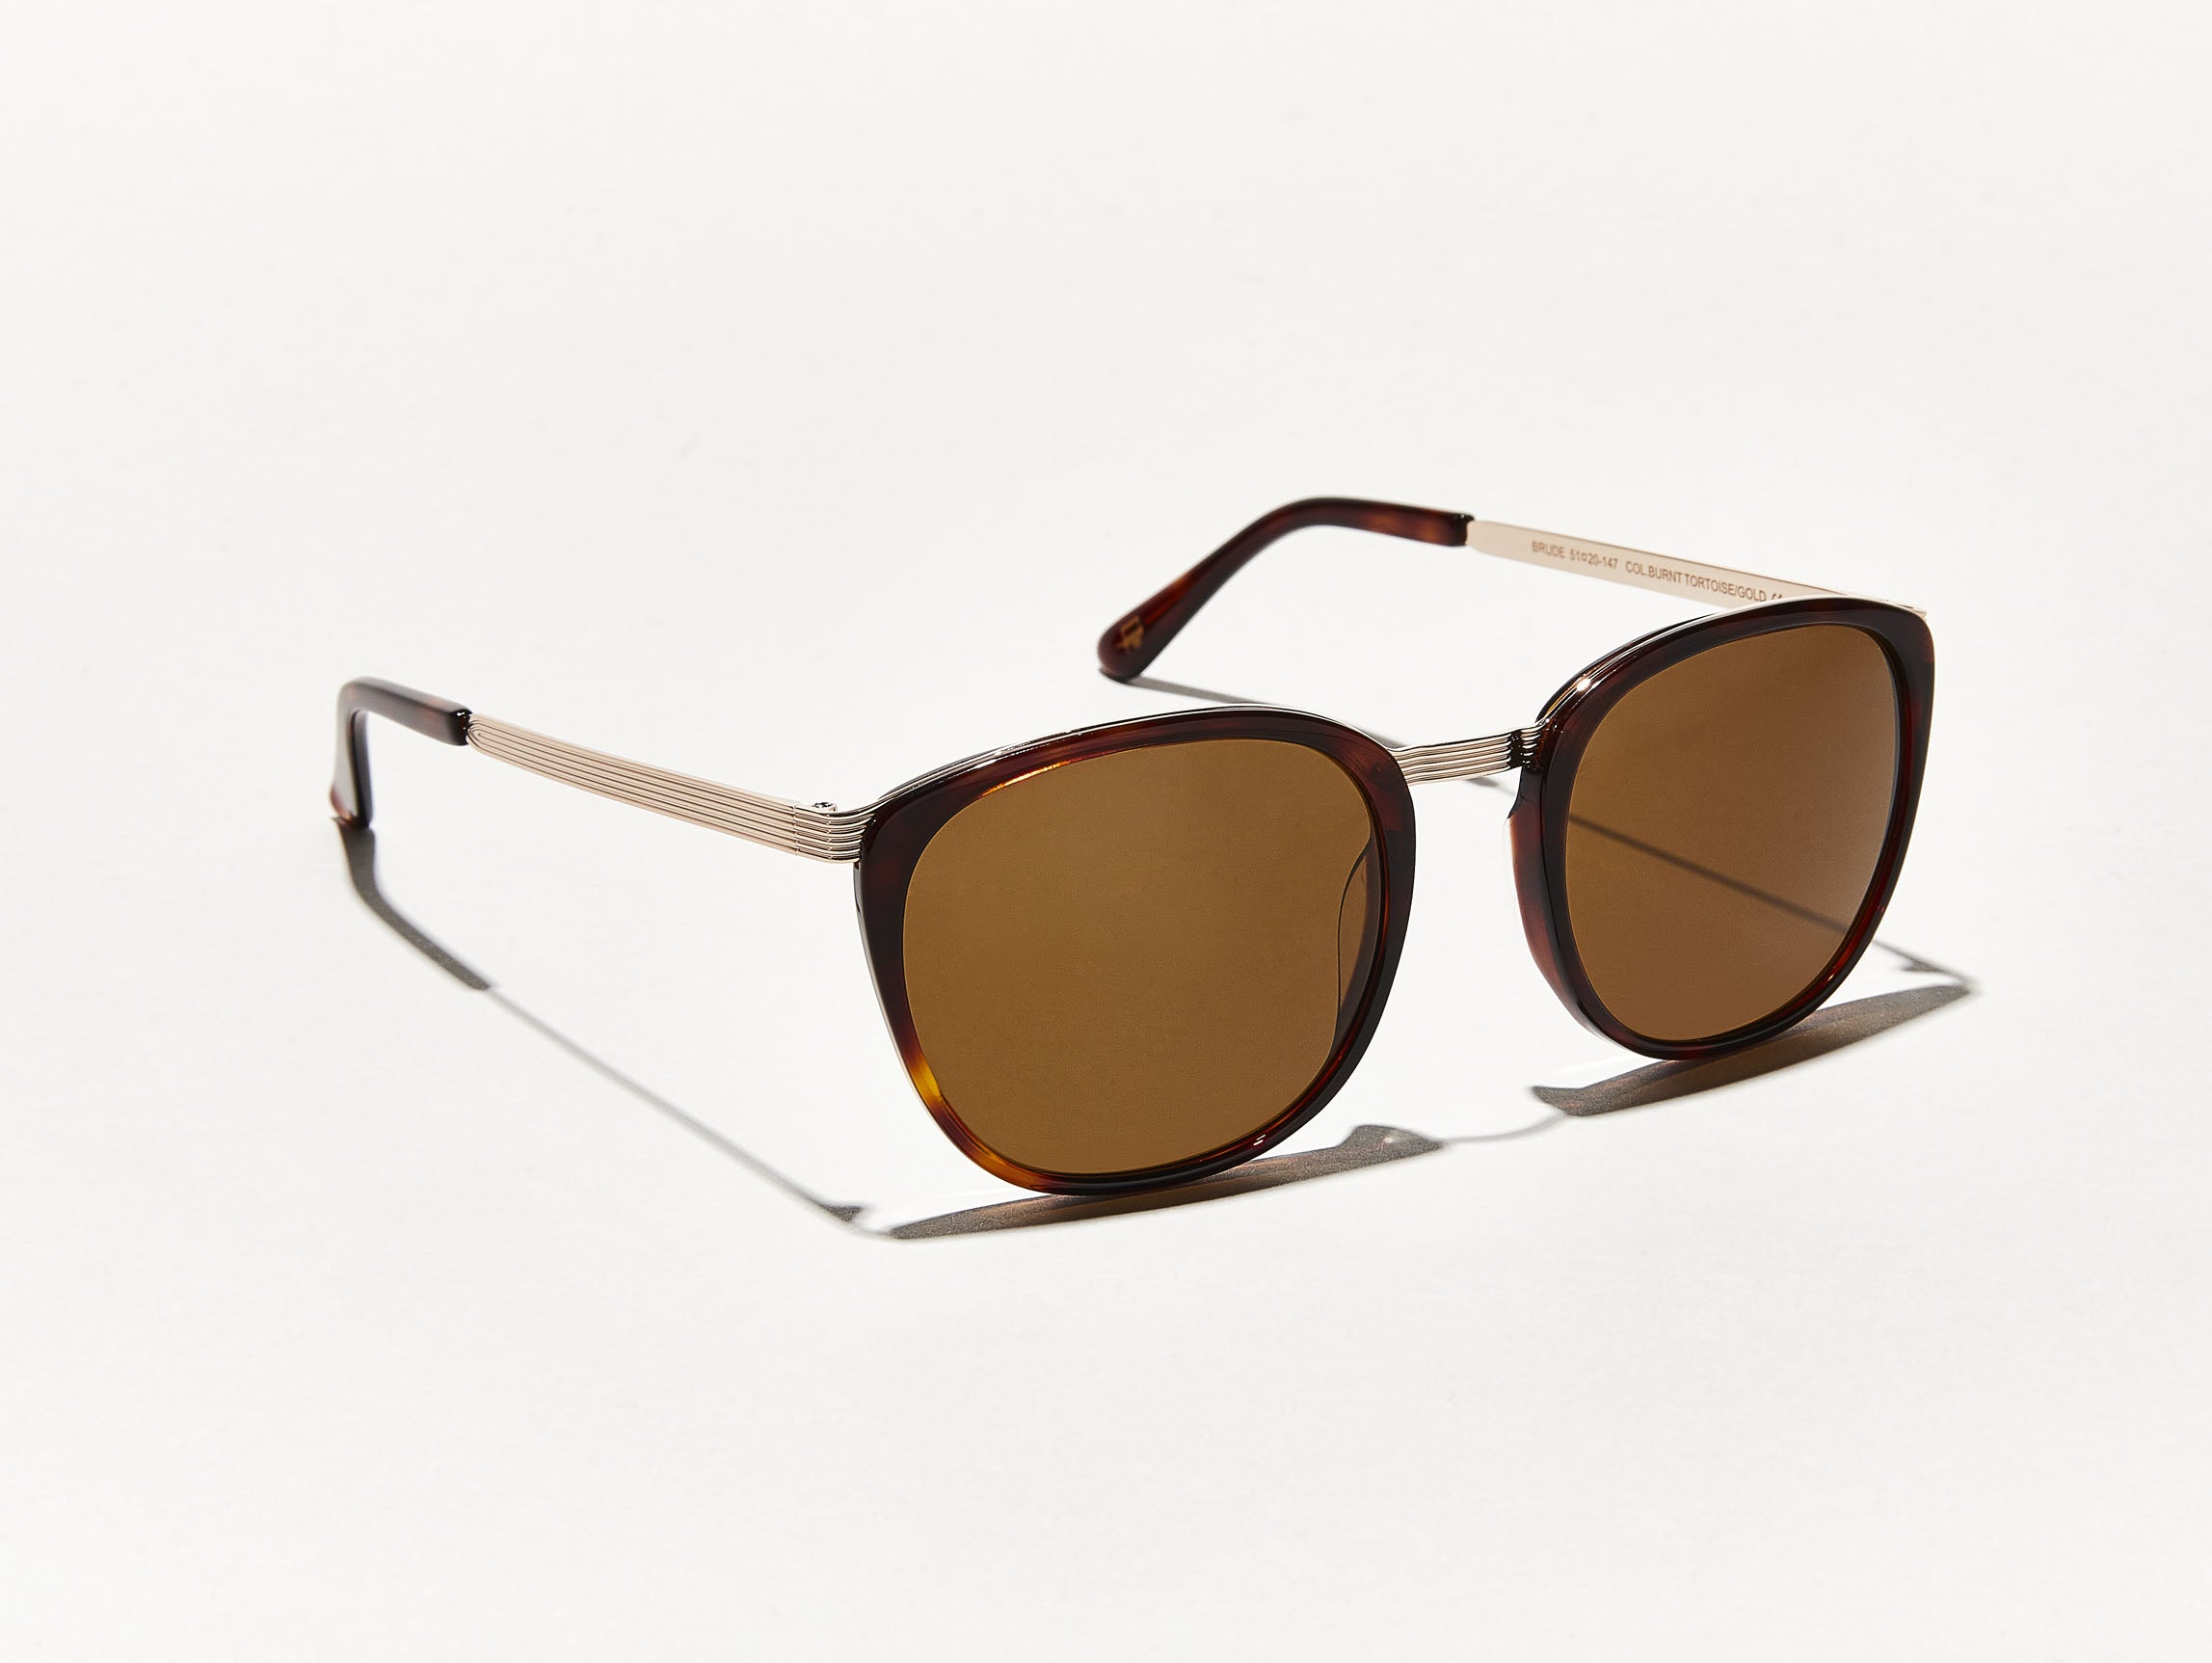 The BRUDE in Burnt Tortoise/Gold with Cosmitan Brown Glass Lenses